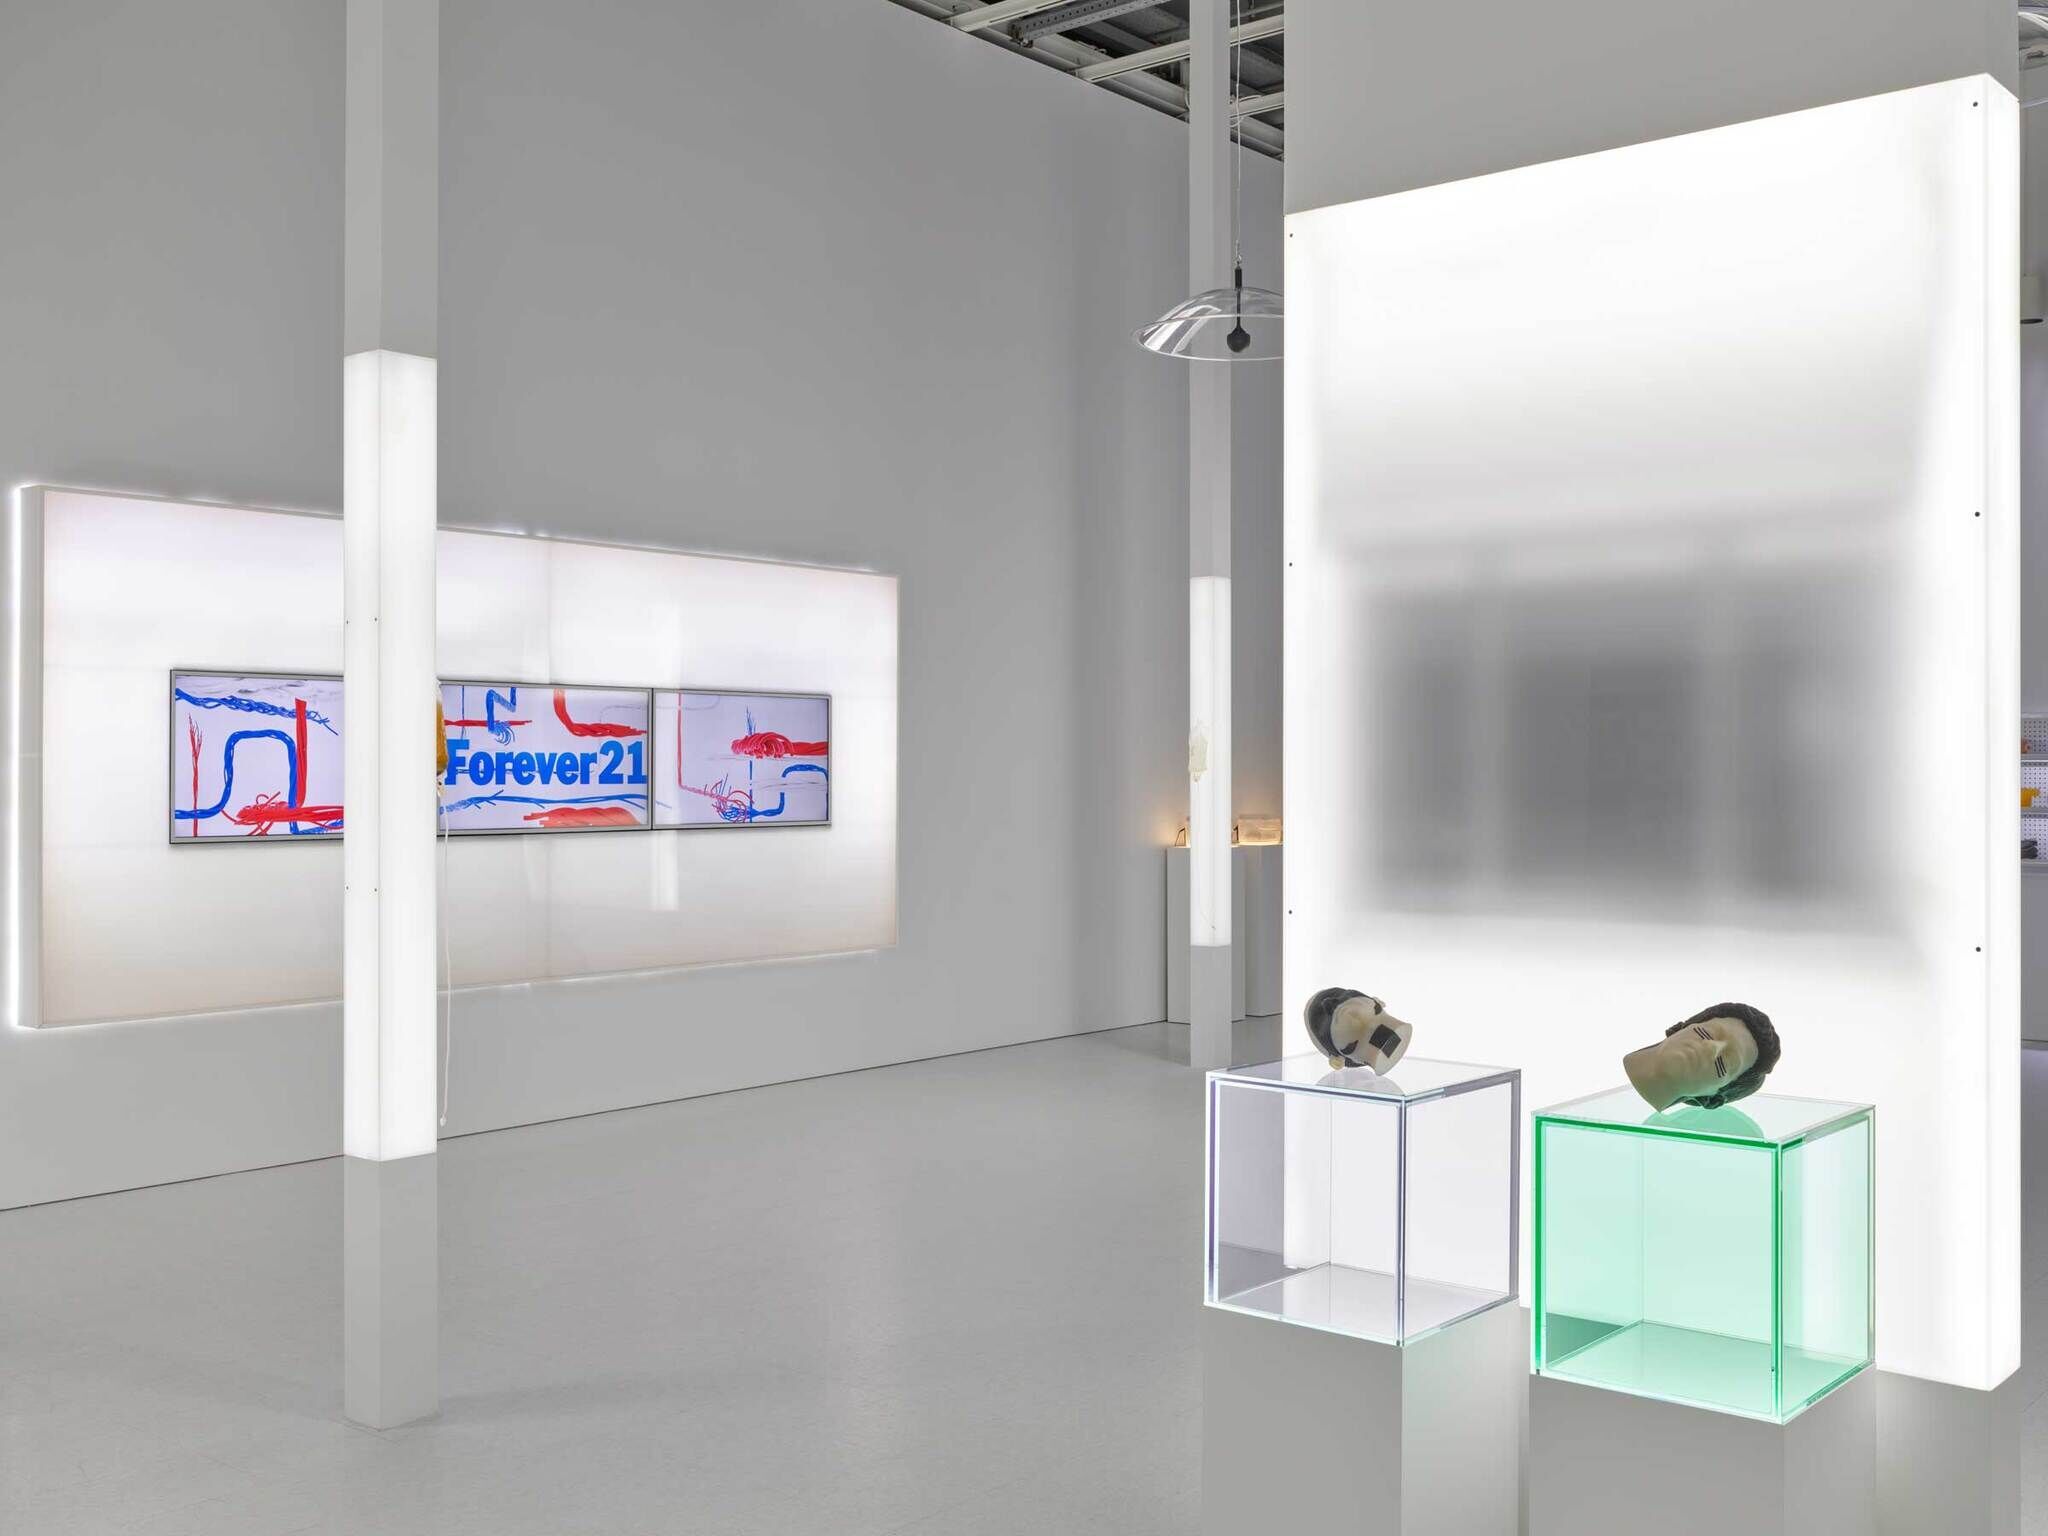 A grey room with light panels, on the left there is a triptych of red and blue designs with the words Forever21, and on the right there are two transparent boxes with mannequin heads.